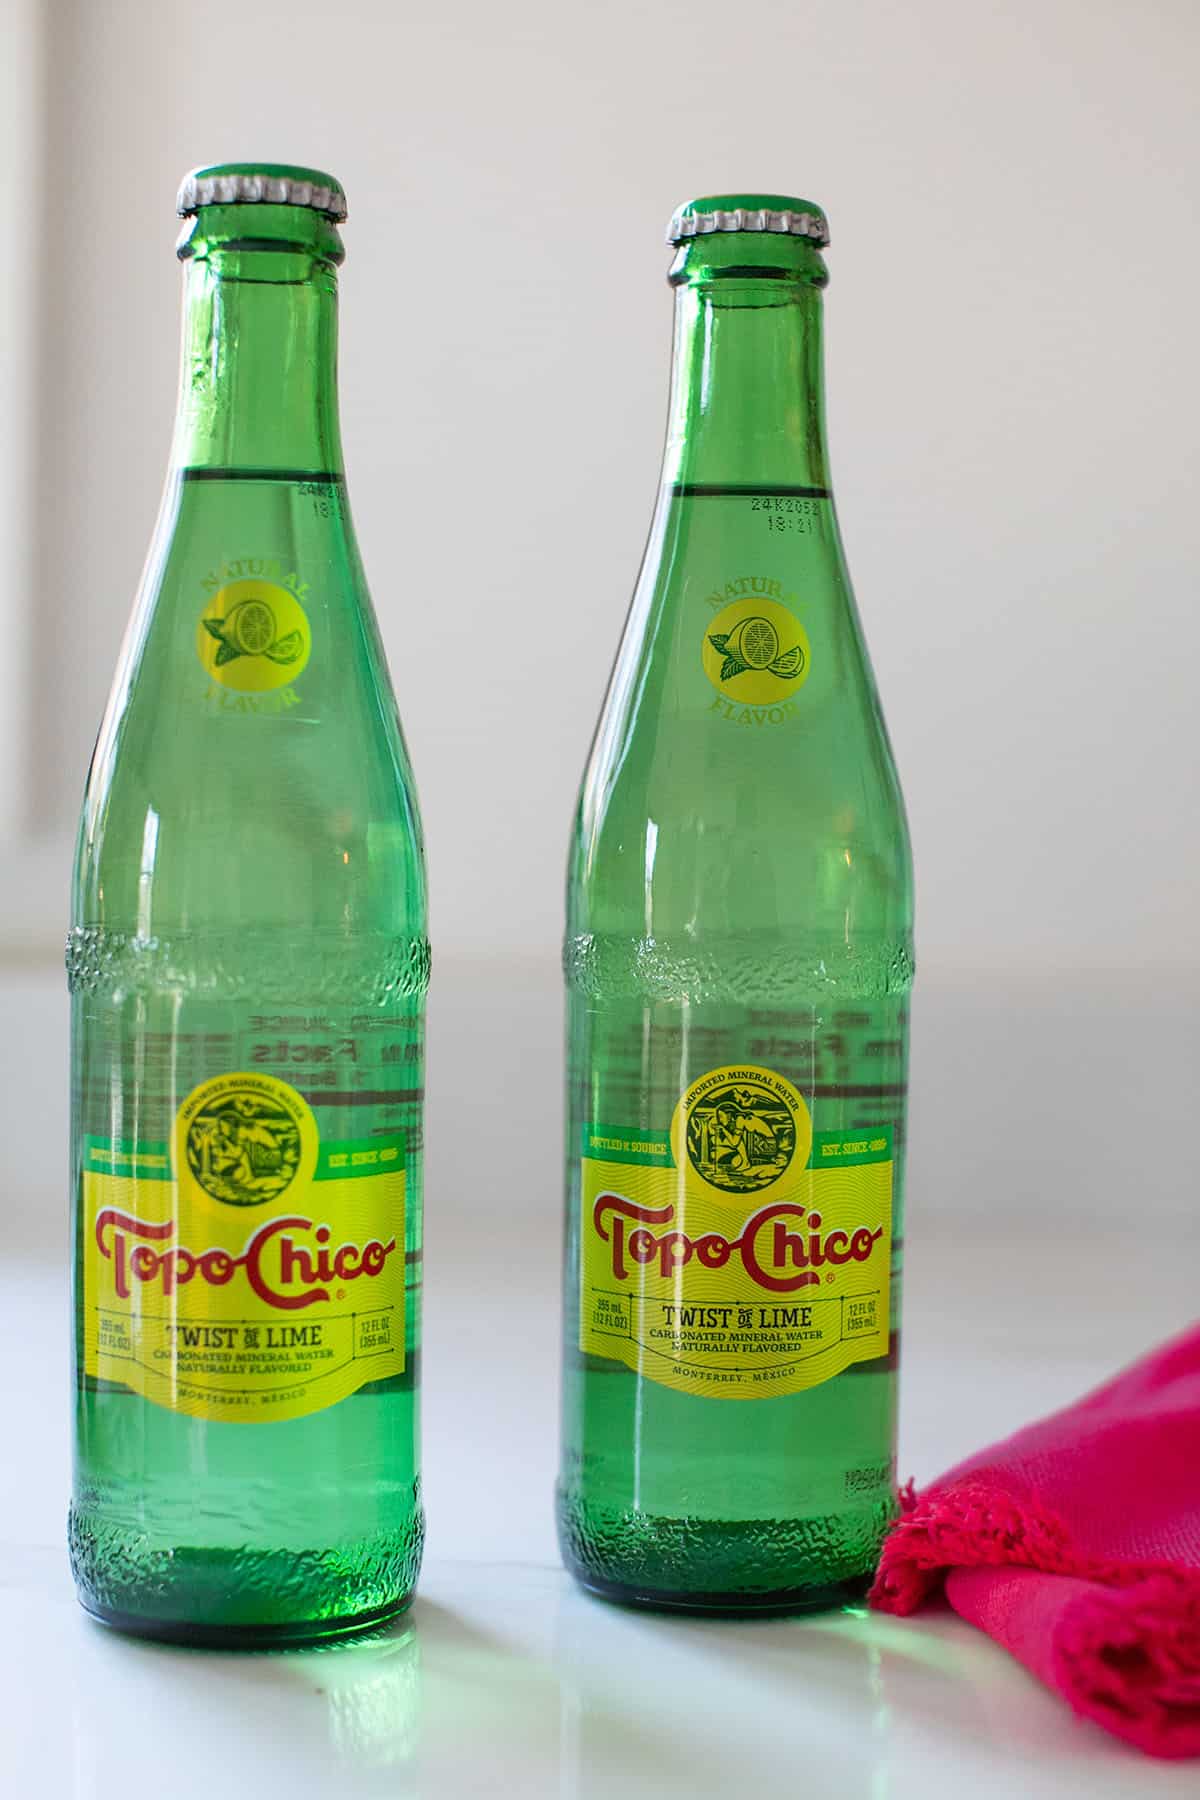 Bottles of Topo Chico with a twist of lime.